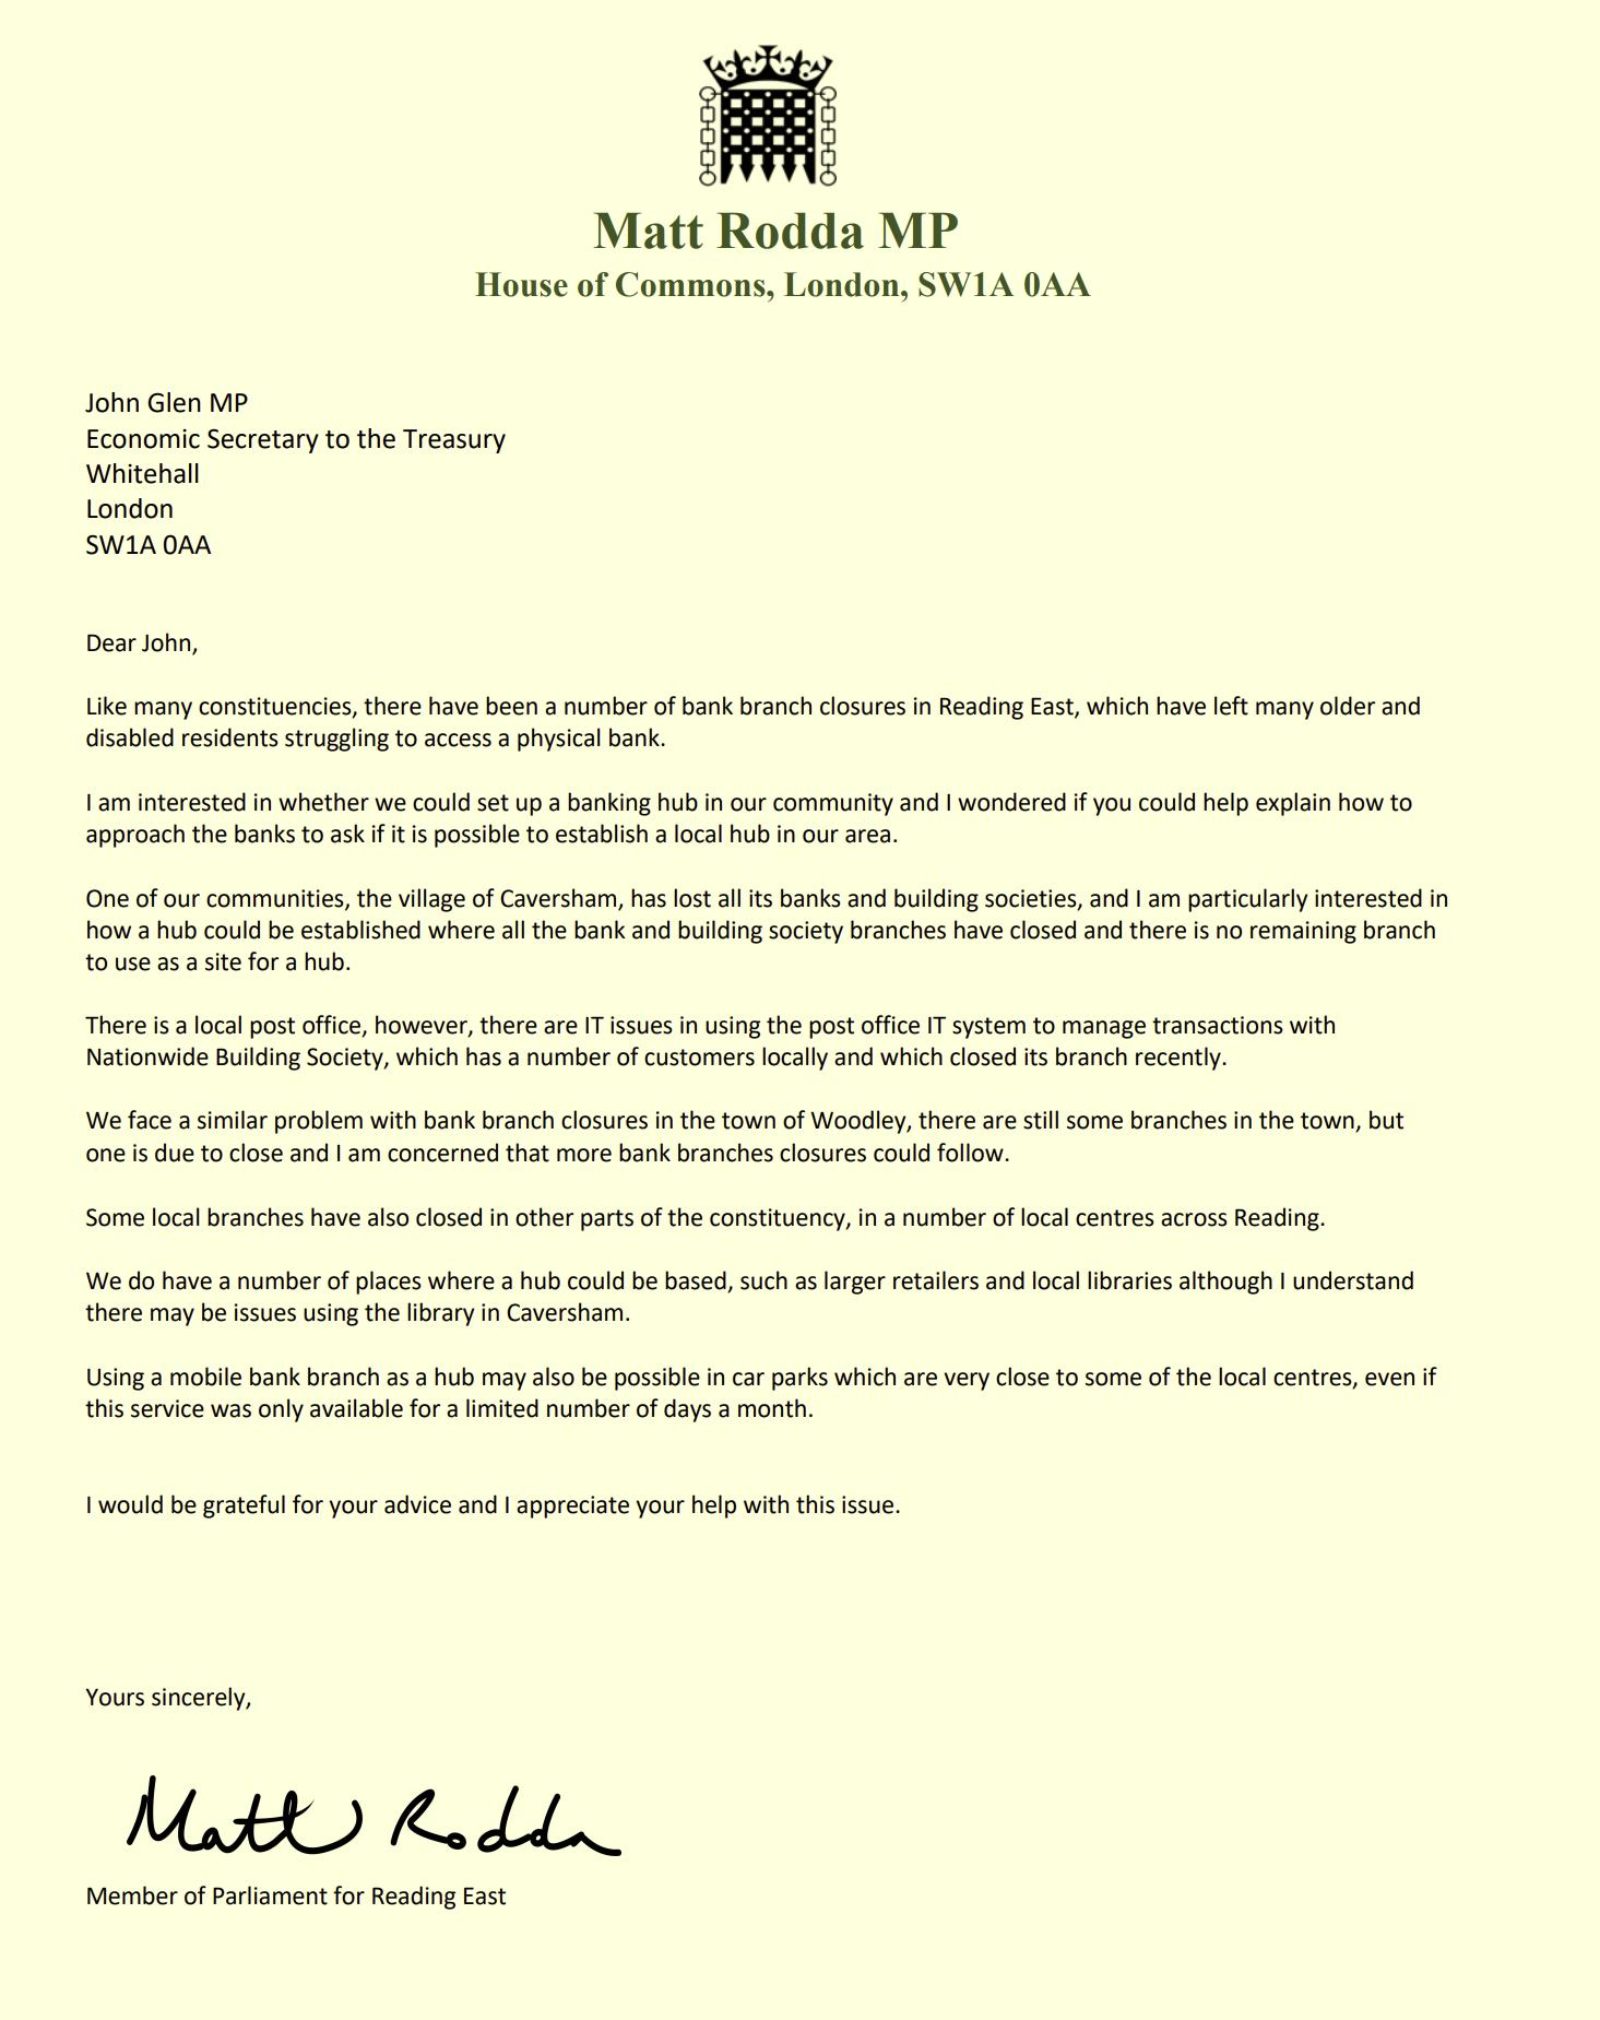 A image of a letter to John Glen MP